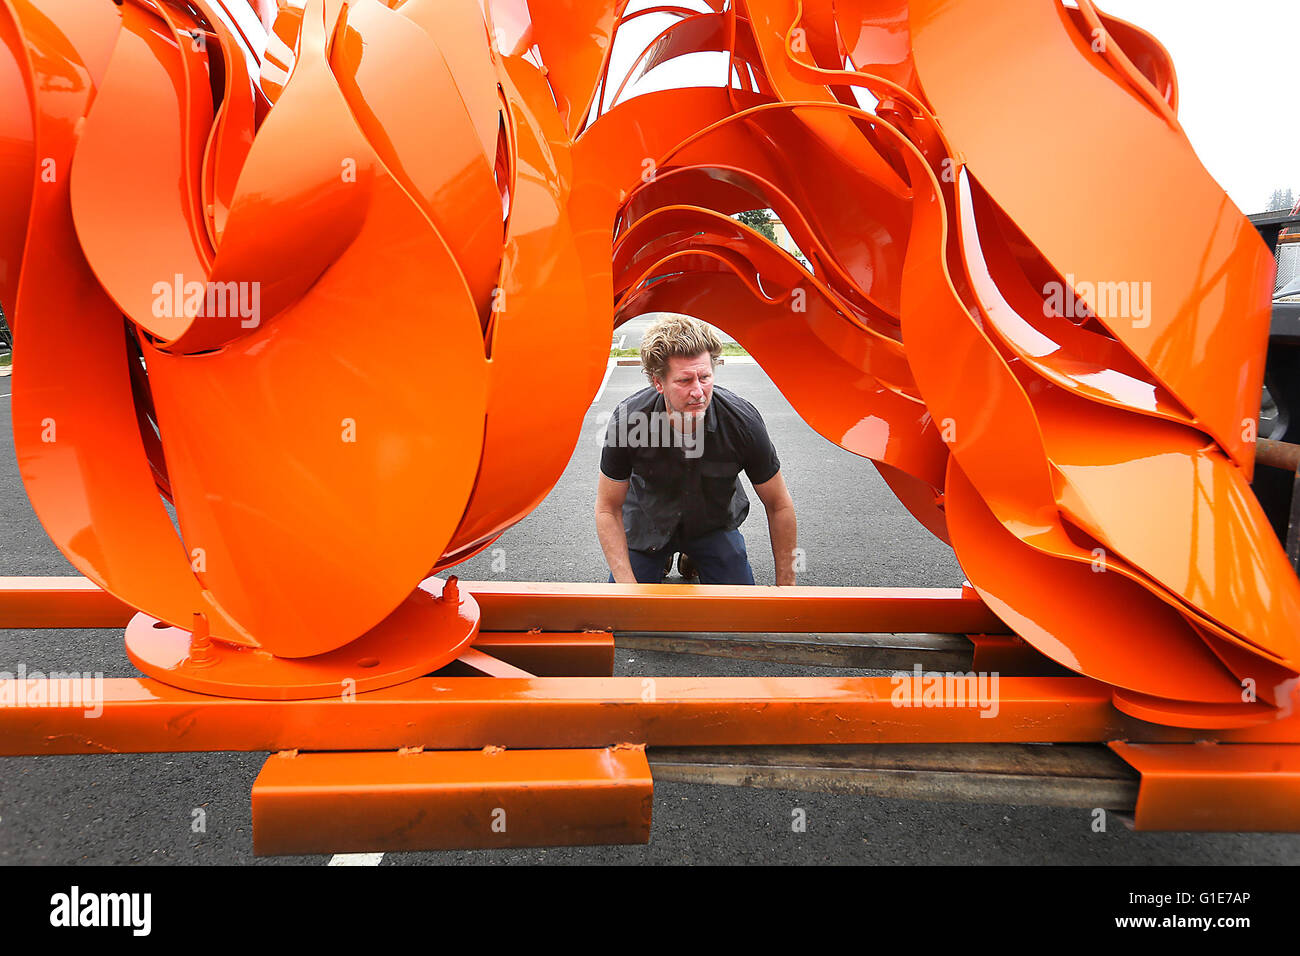 Napa, CA, USA. 11th May, 2016. Phoenix-based artist Pete Deise checks the balance of his sculpture as it is moved on a forklift at the South Napa Century Center on Wednesday morning. The sculpture weighs about 3,500 pounds is 14 feet long by 6 feet high and 28 inches wide. © Napa Valley Register/ZUMA Wire/Alamy Live News Stock Photo